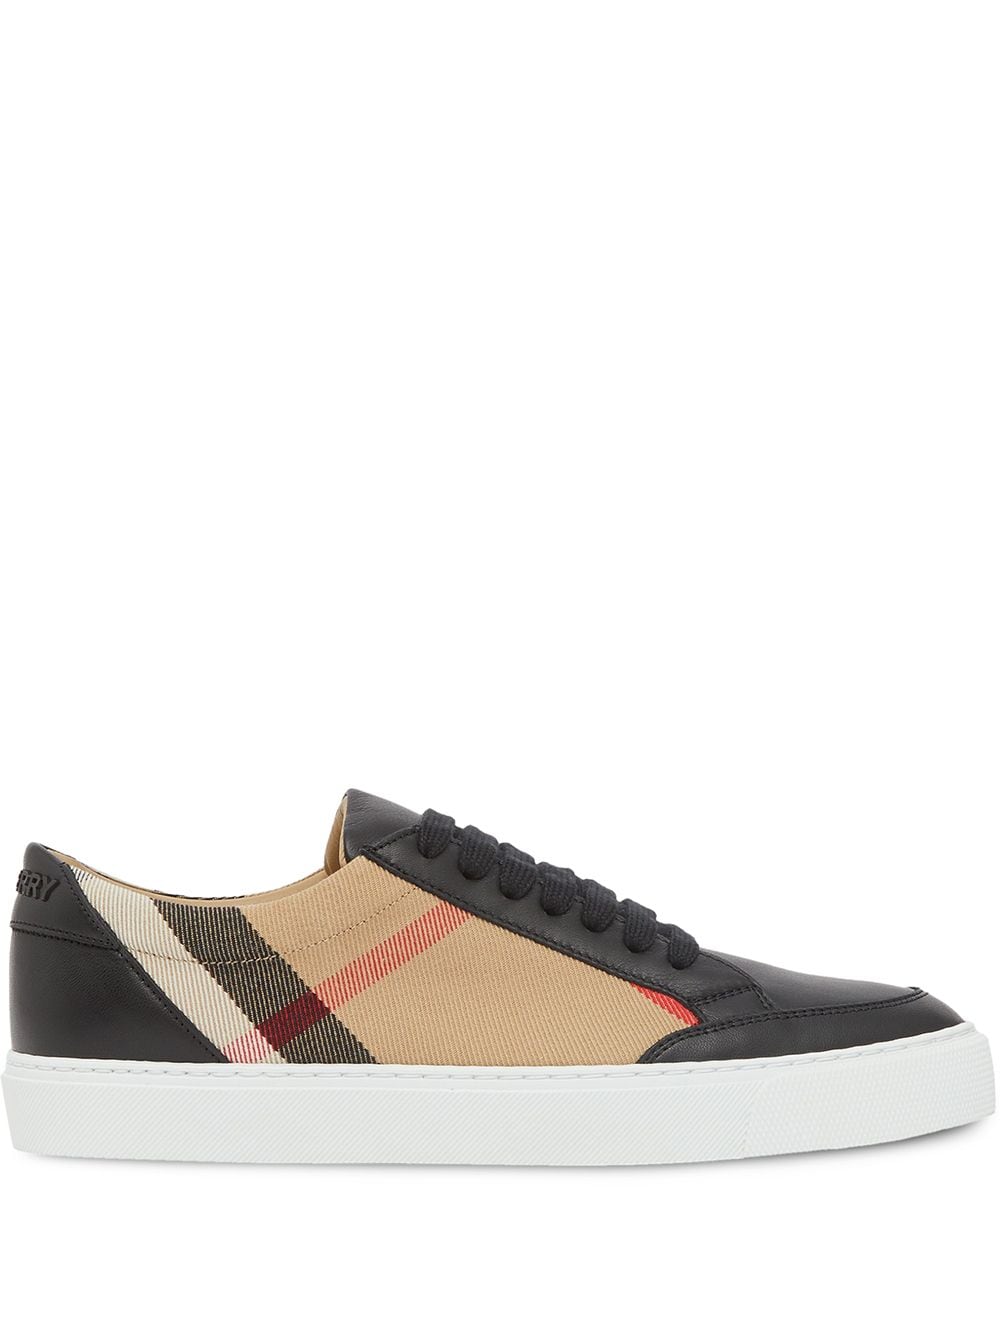 Image 1 of Burberry check pattern low-top sneakers